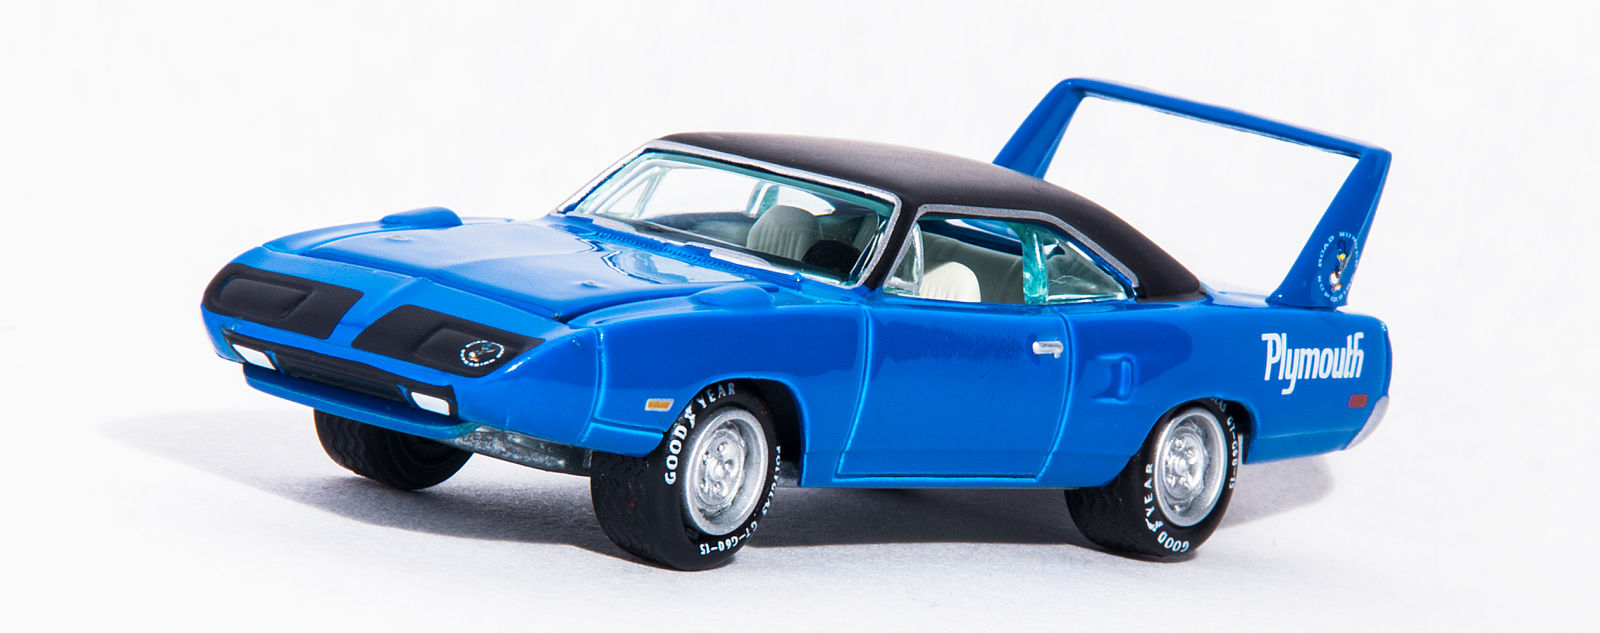 Illustration for article titled Johnny Lightning - Plymouth Superbird [Review]